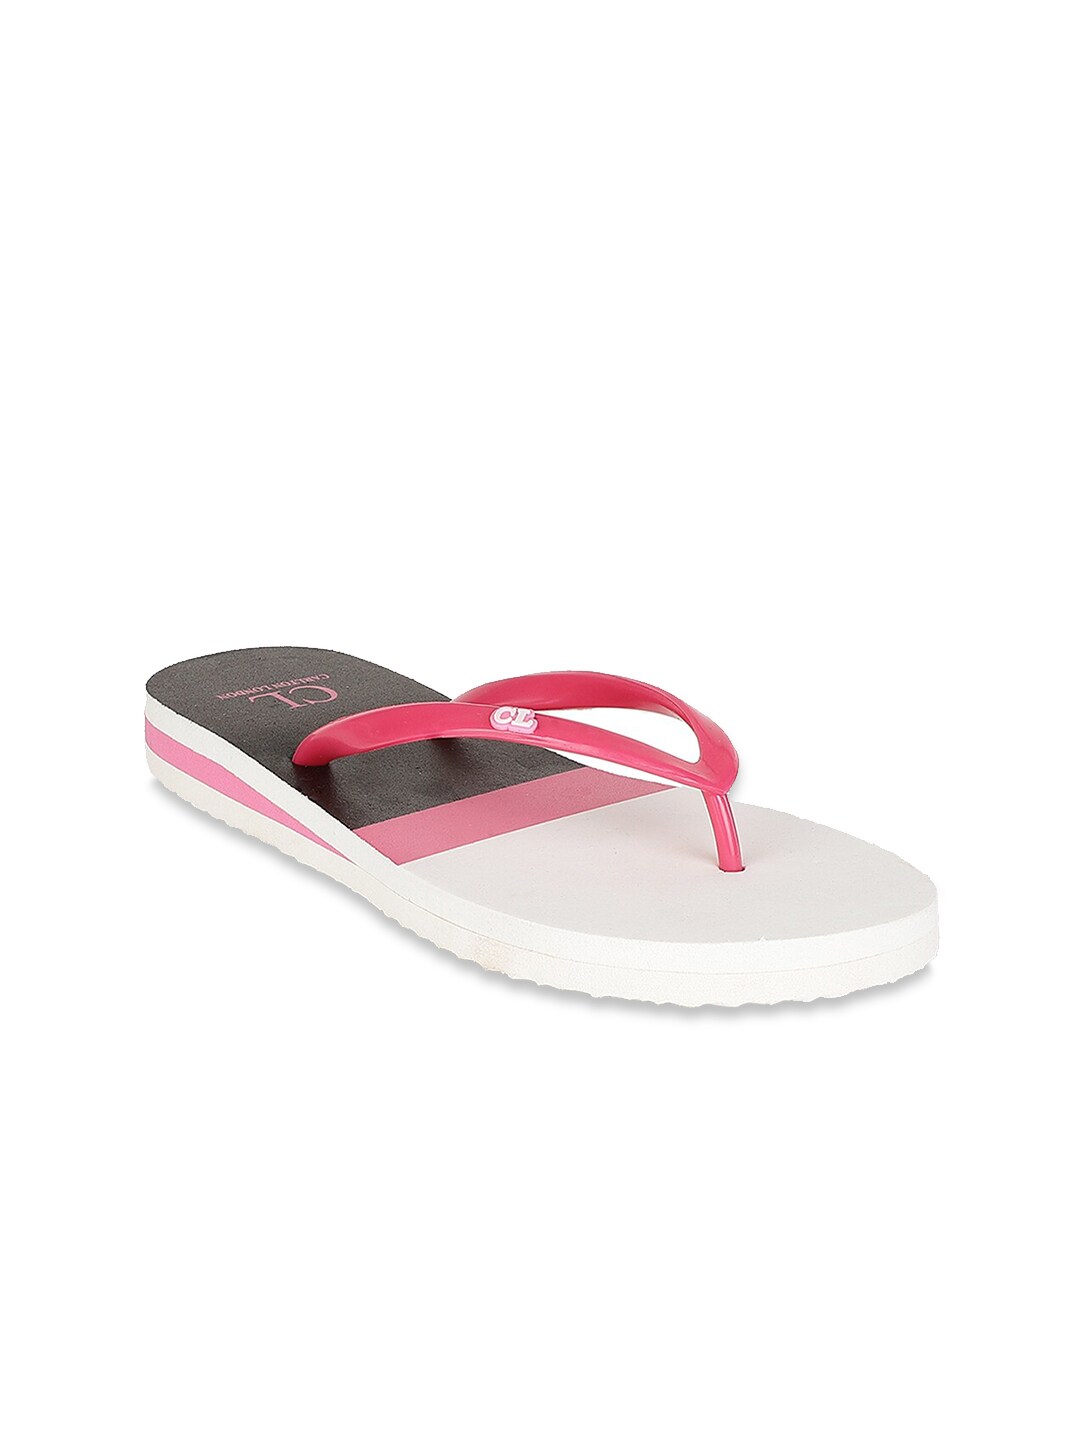 Carlton London Women Pink & White Colourblocked Room Slippers Price in India